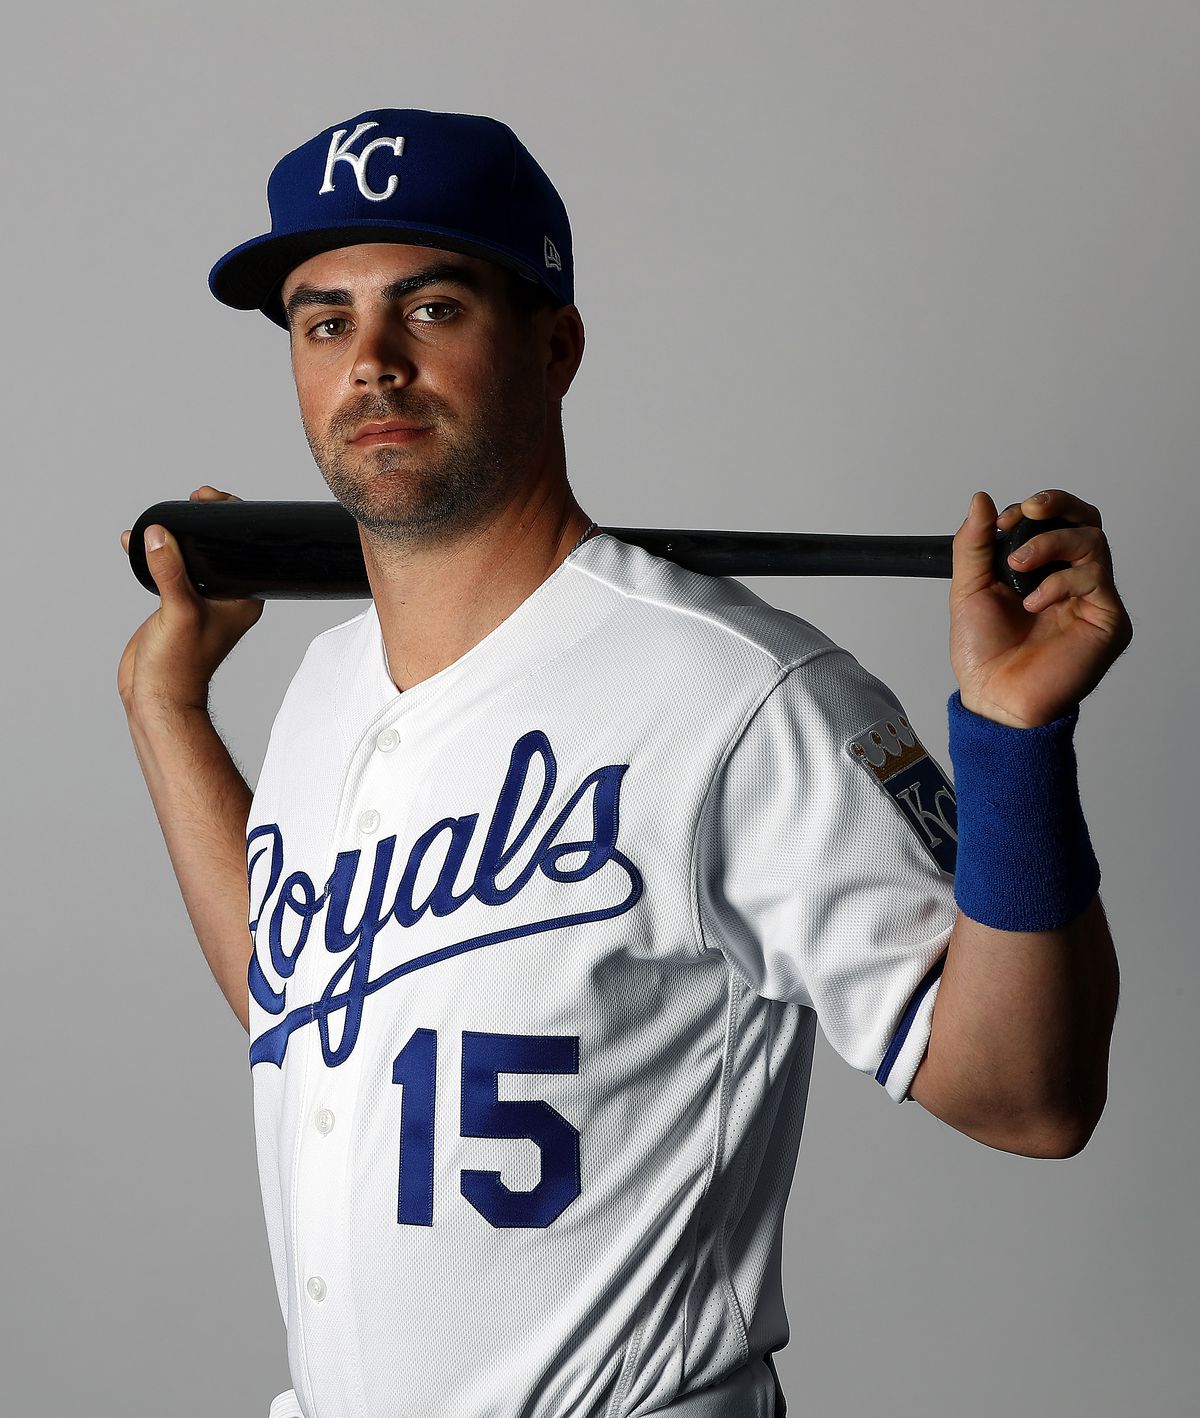 Whit Merrifield #15 poses for a portrait during Kansas City Royals photo day on February 21, 2019 in Surprise, Arizona.